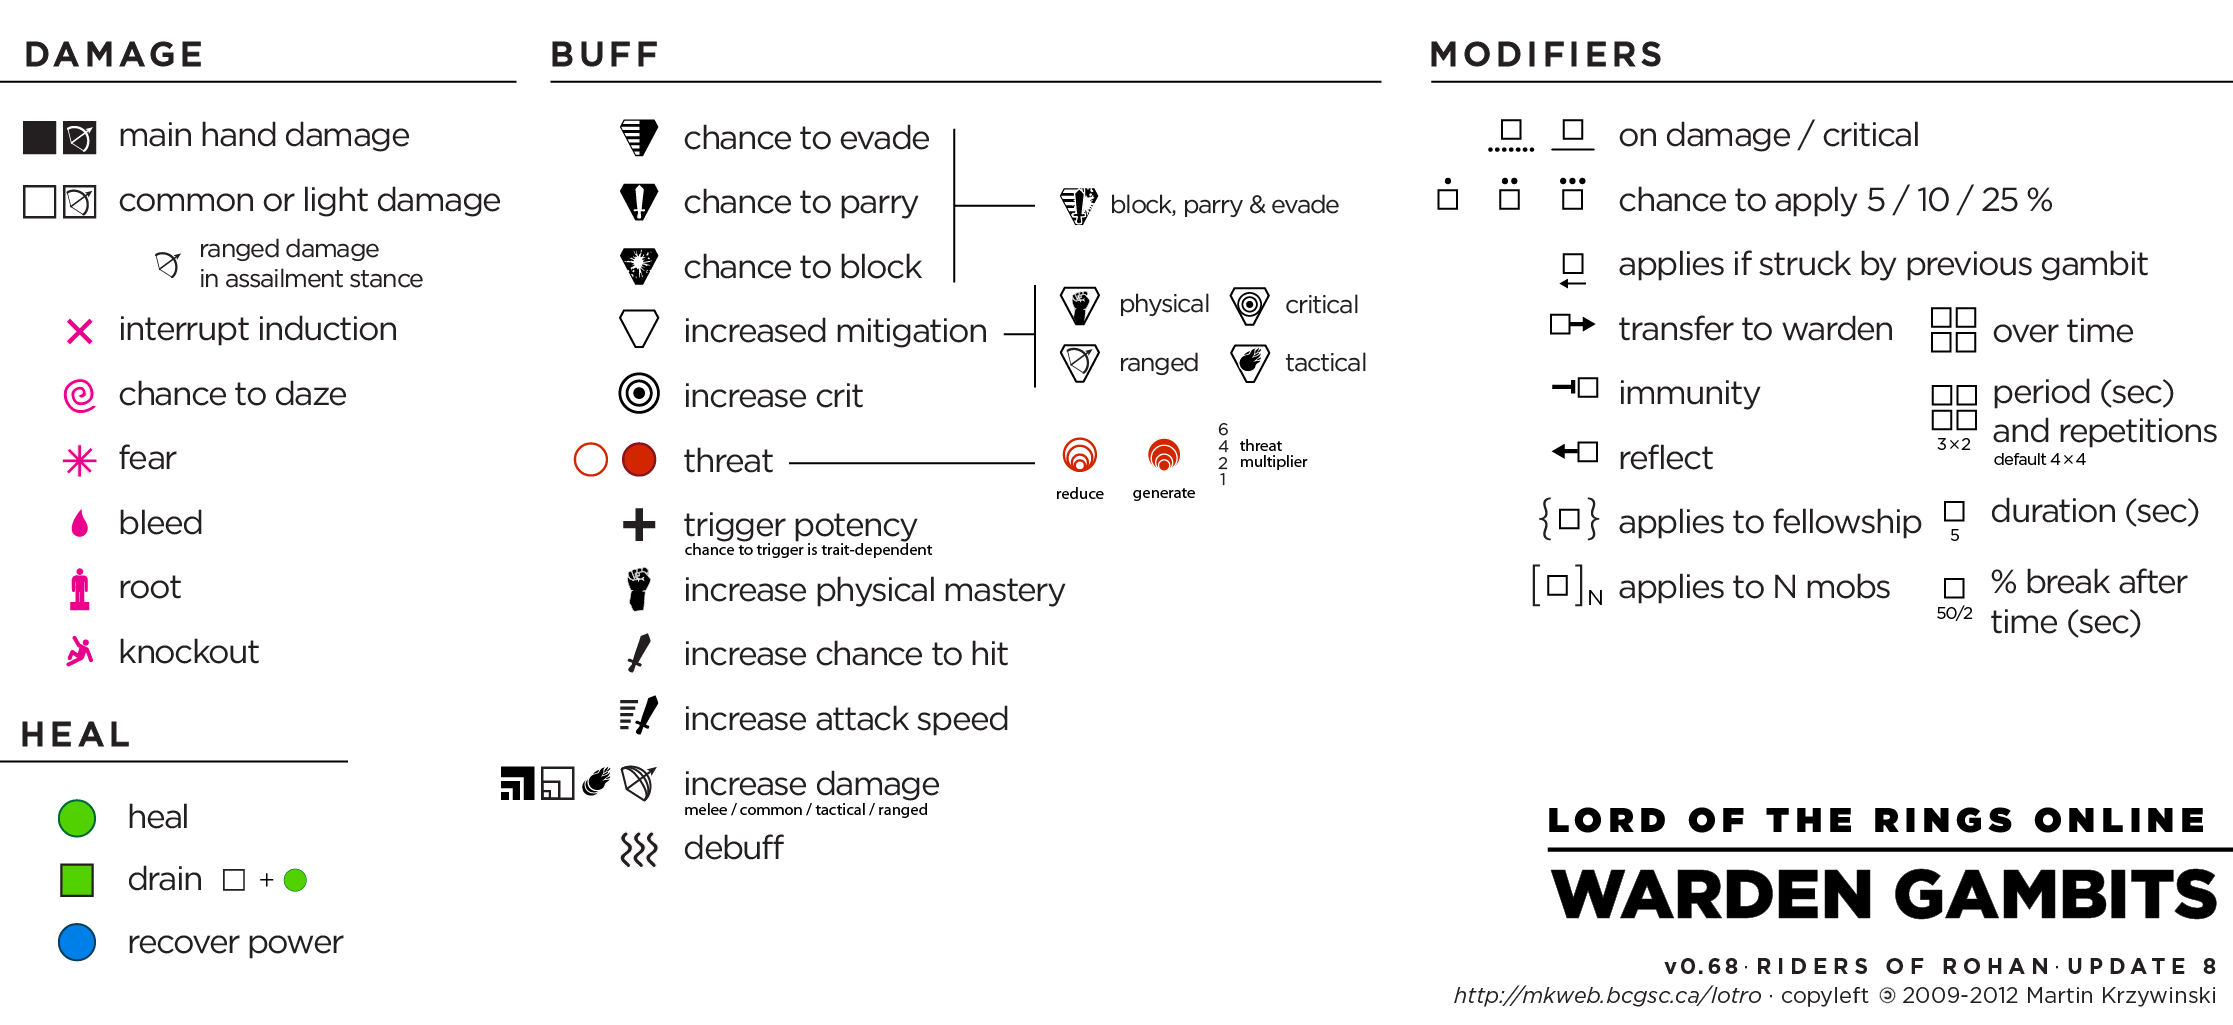 Lord of the Rings Online - LOTRO - Warden Gambit Chart v0.68 - Legend